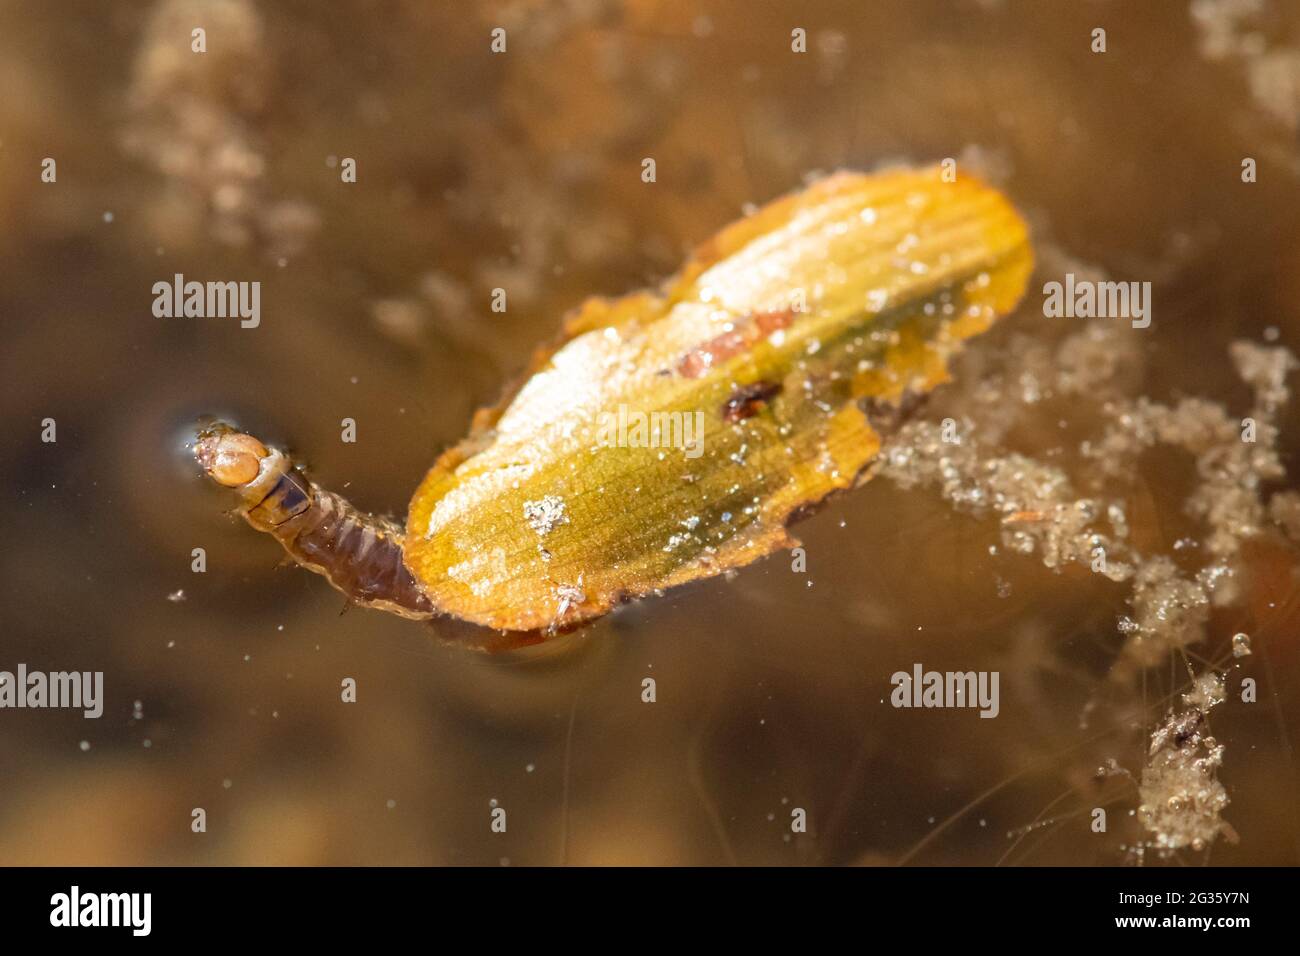 Caddisfly larva (Trichoptera sp.) in a pond using plant material as a case, UK Stock Photo